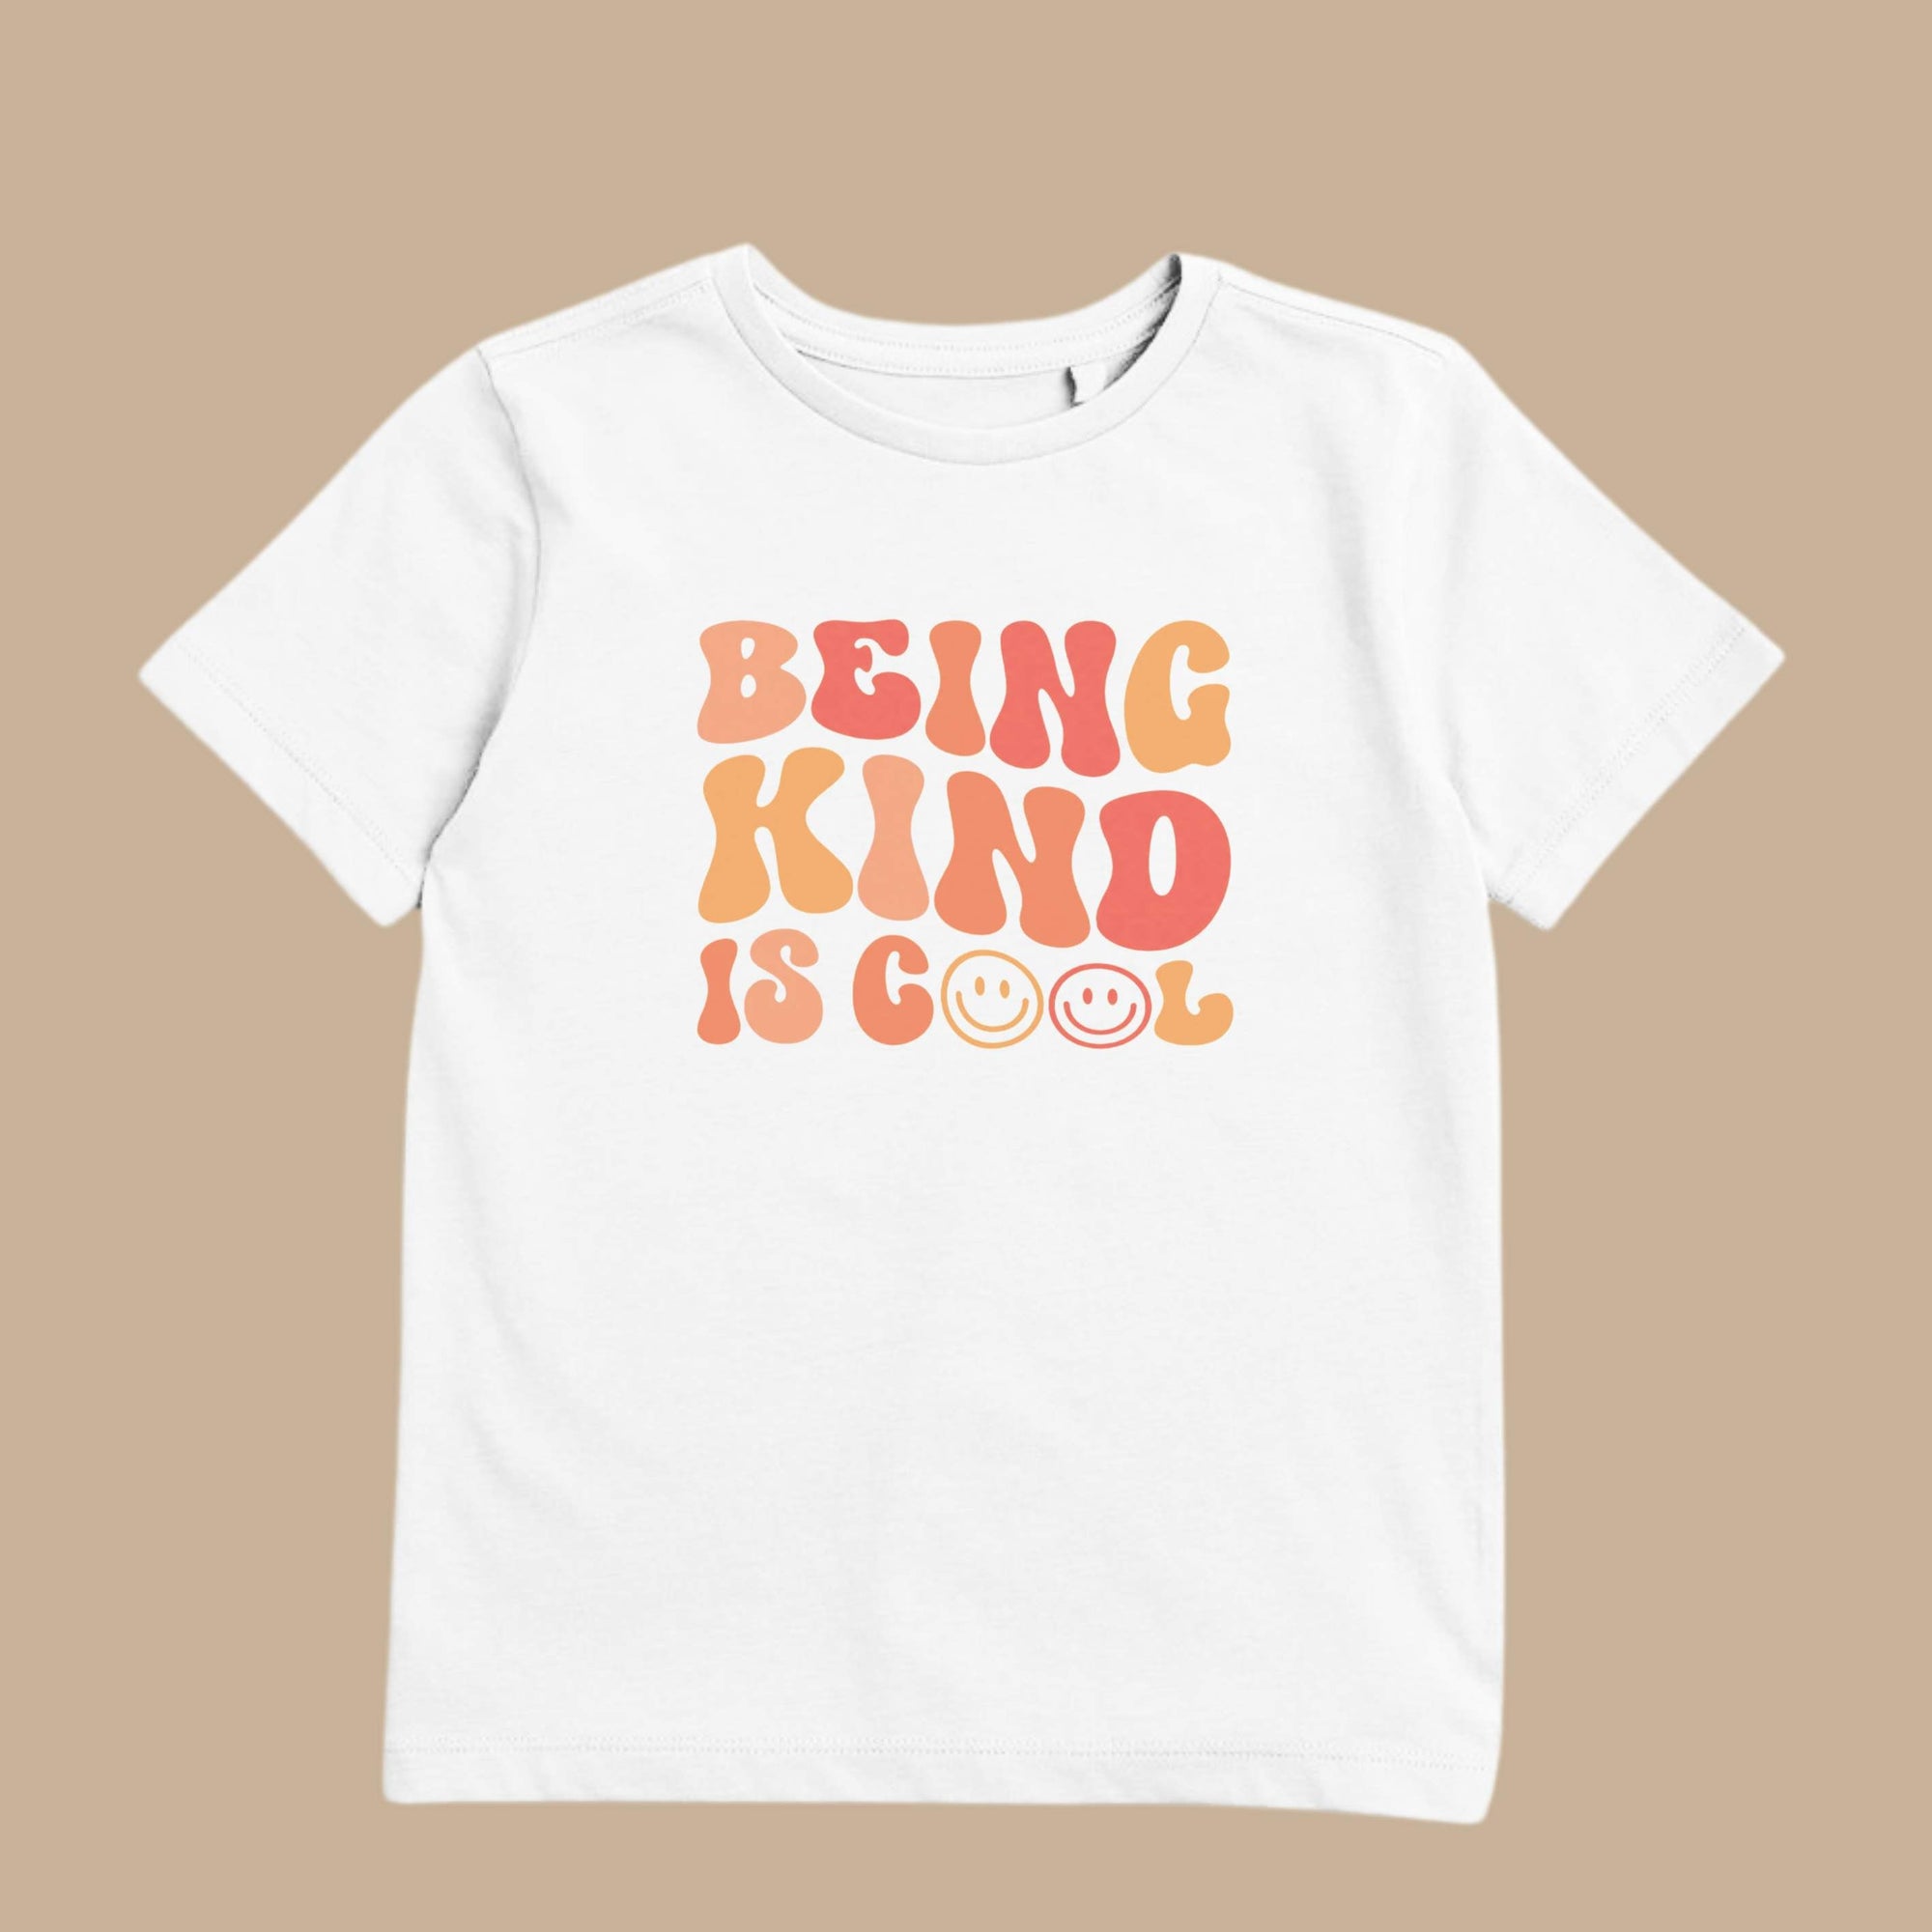 "Being Kind is Cool" T-shirt | Harmony Day